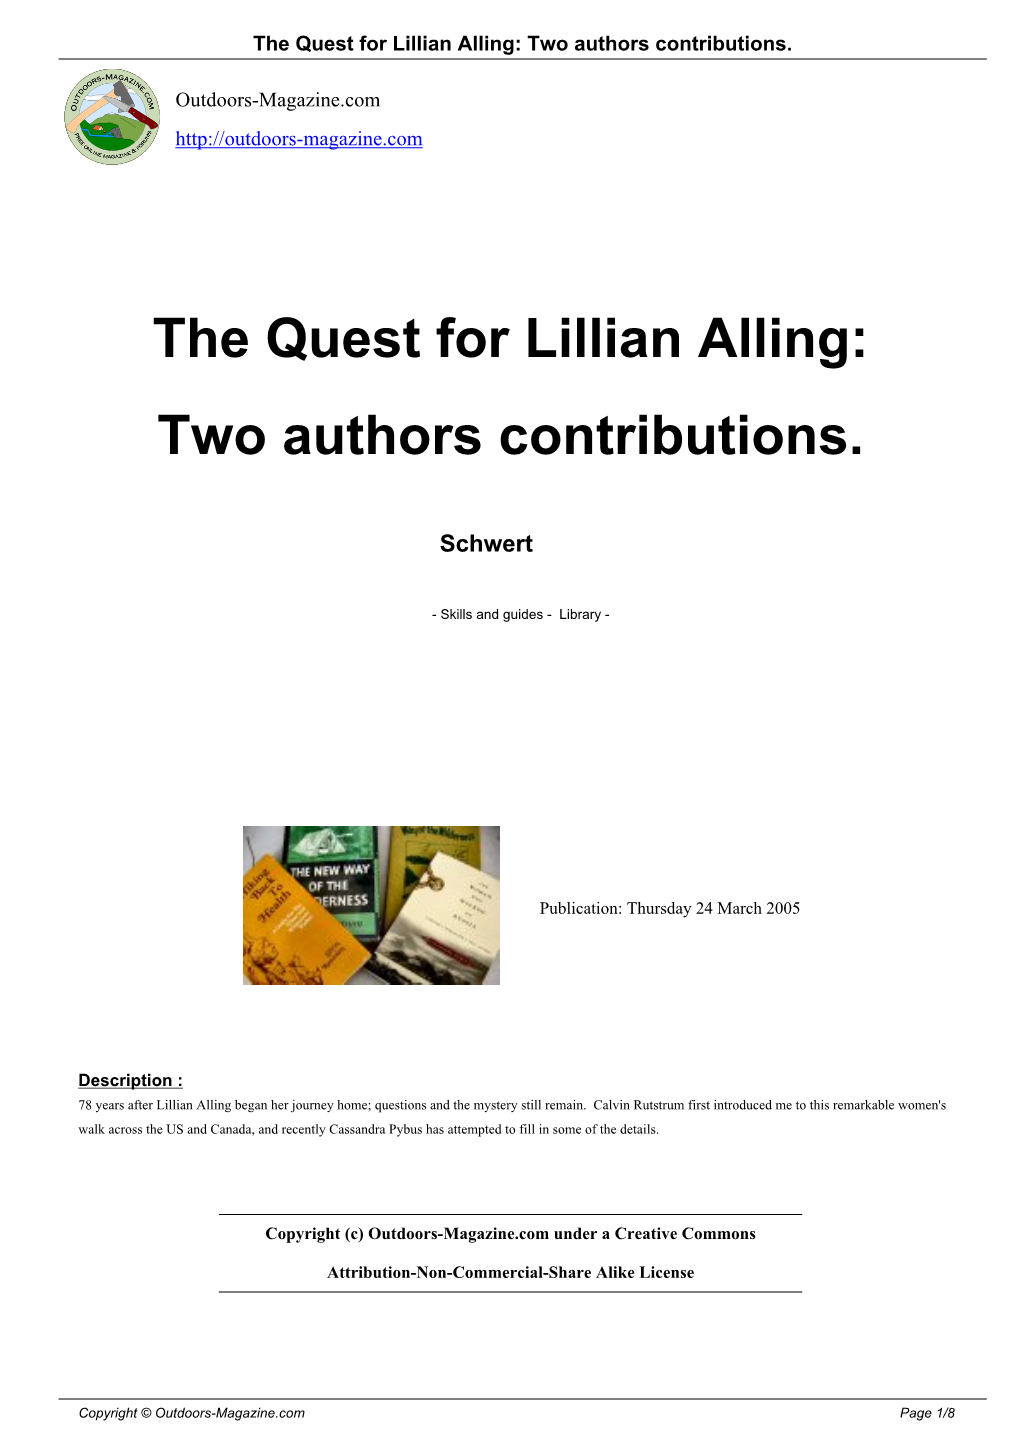 The Quest for Lillian Alling: Two Authors Contributions